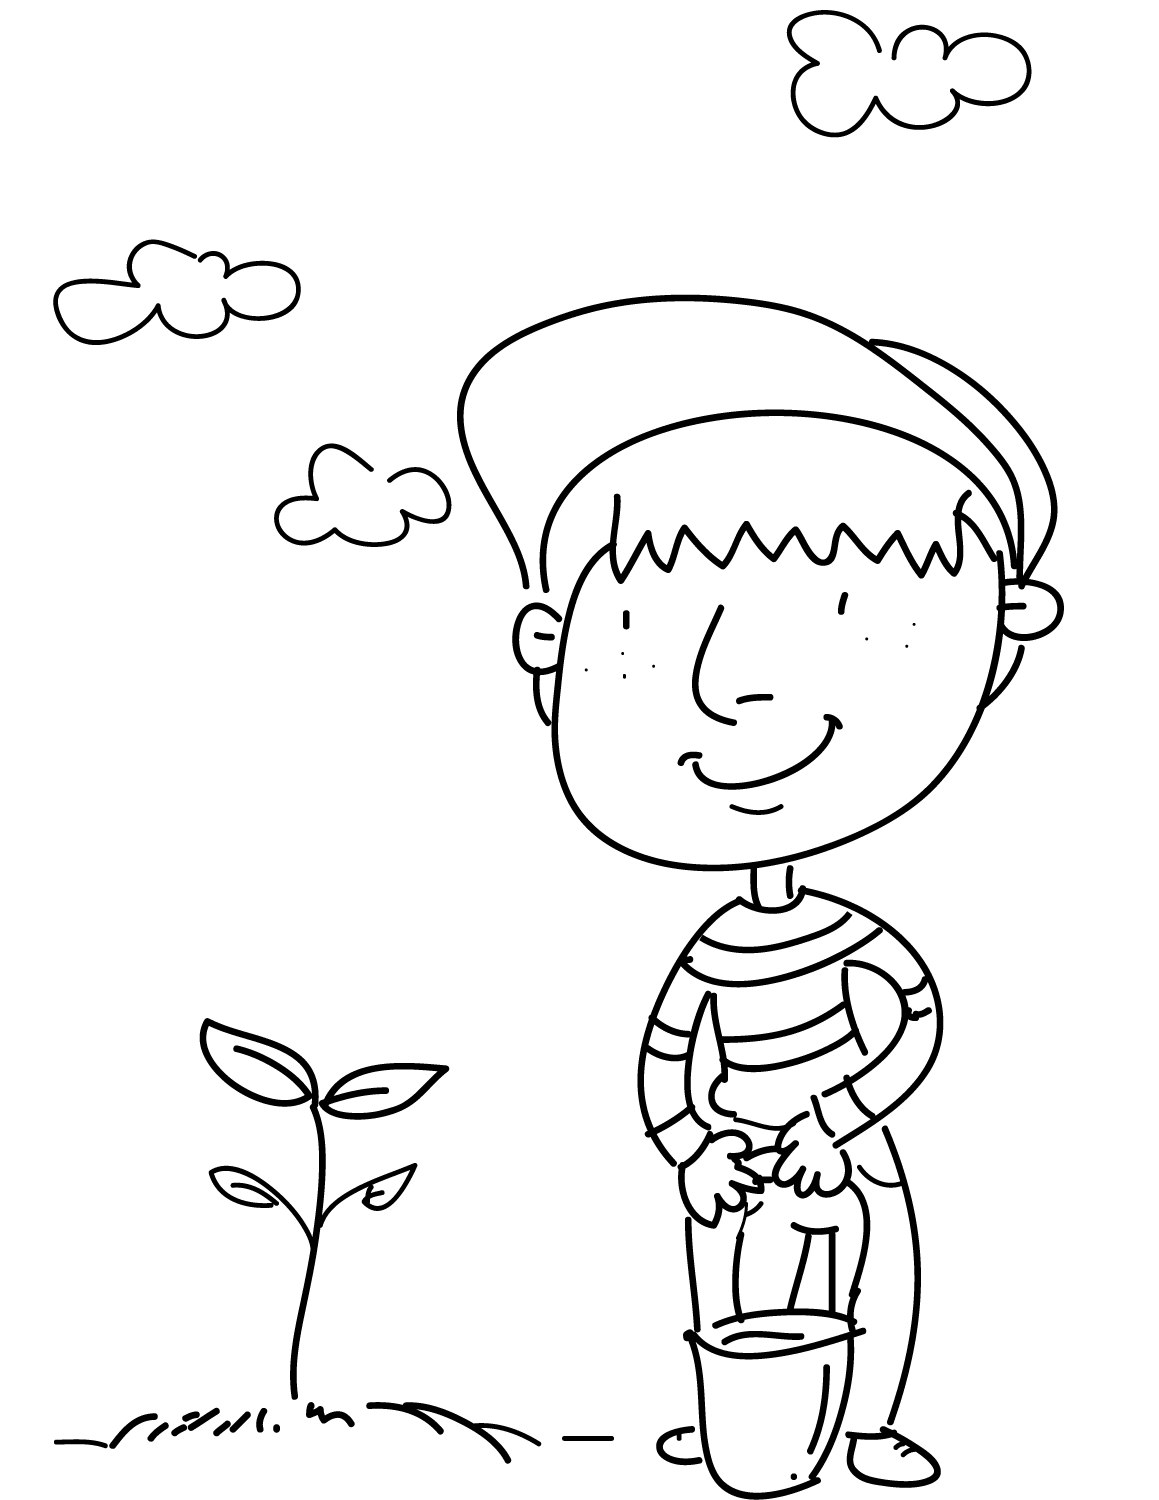 Earth Day Coloring Pages To Print